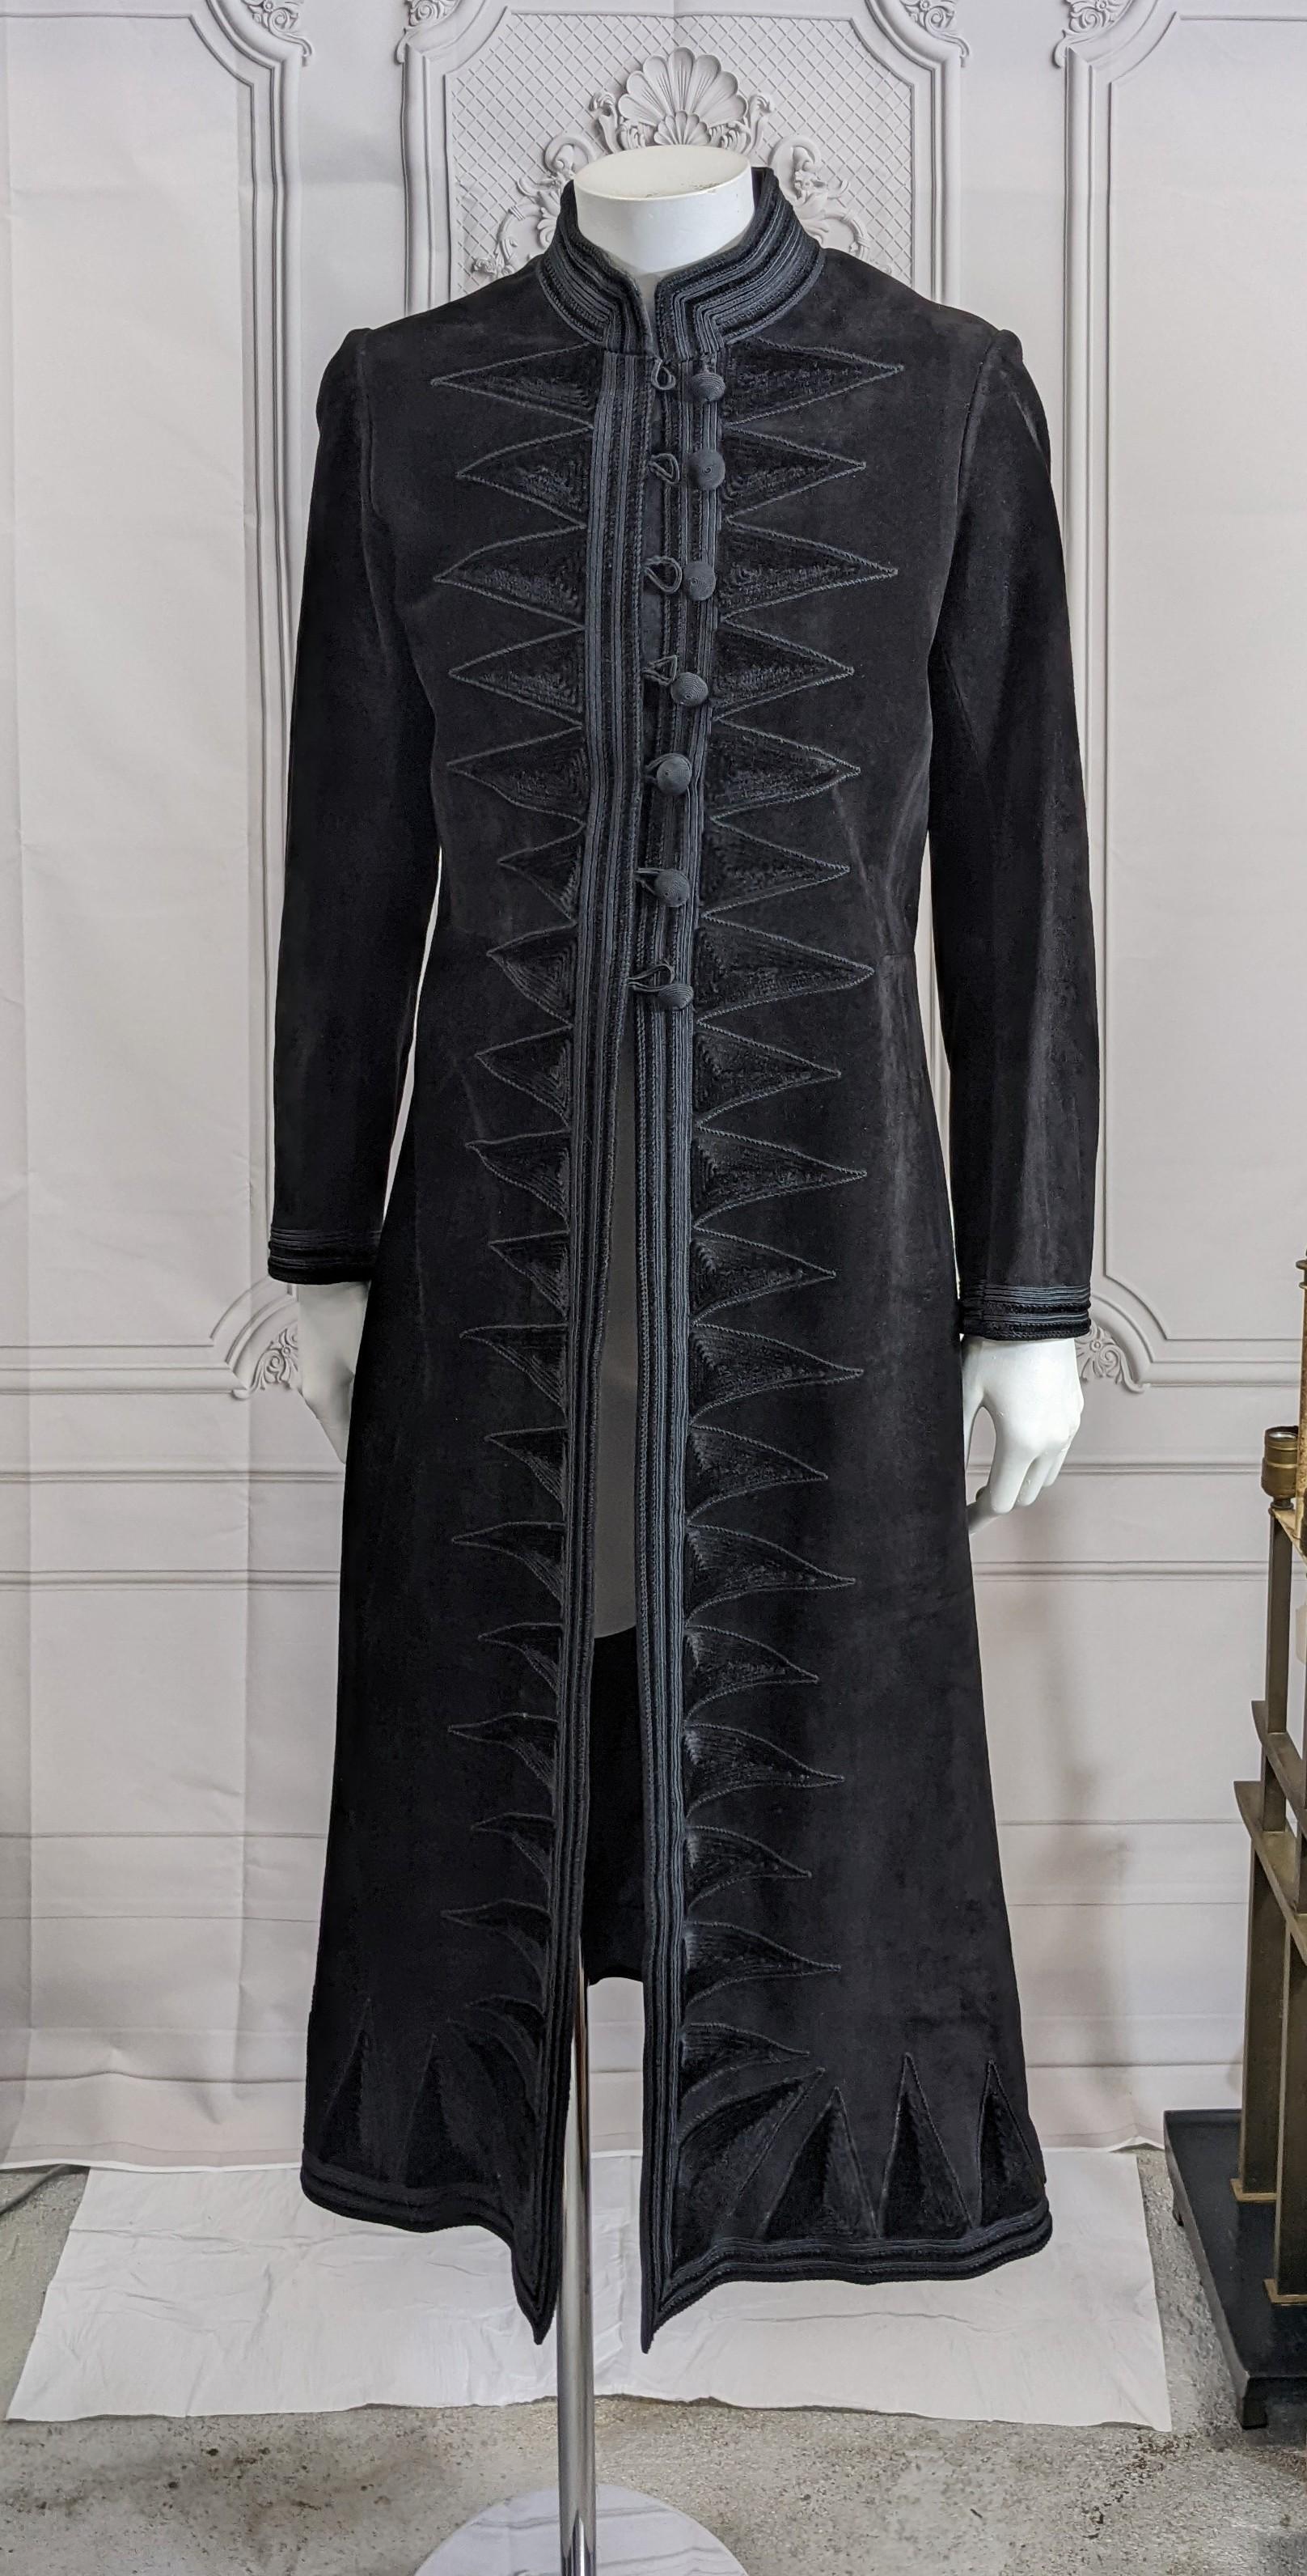 Extraordinary Museum Quality Yves Saint Laurent  Early Haute Couture coat from fall/winter 1970 in a Russian style which predates his Opera Ballets Russes collection by half a decade. The cossack styled long coat of black heavy suede embroidered in